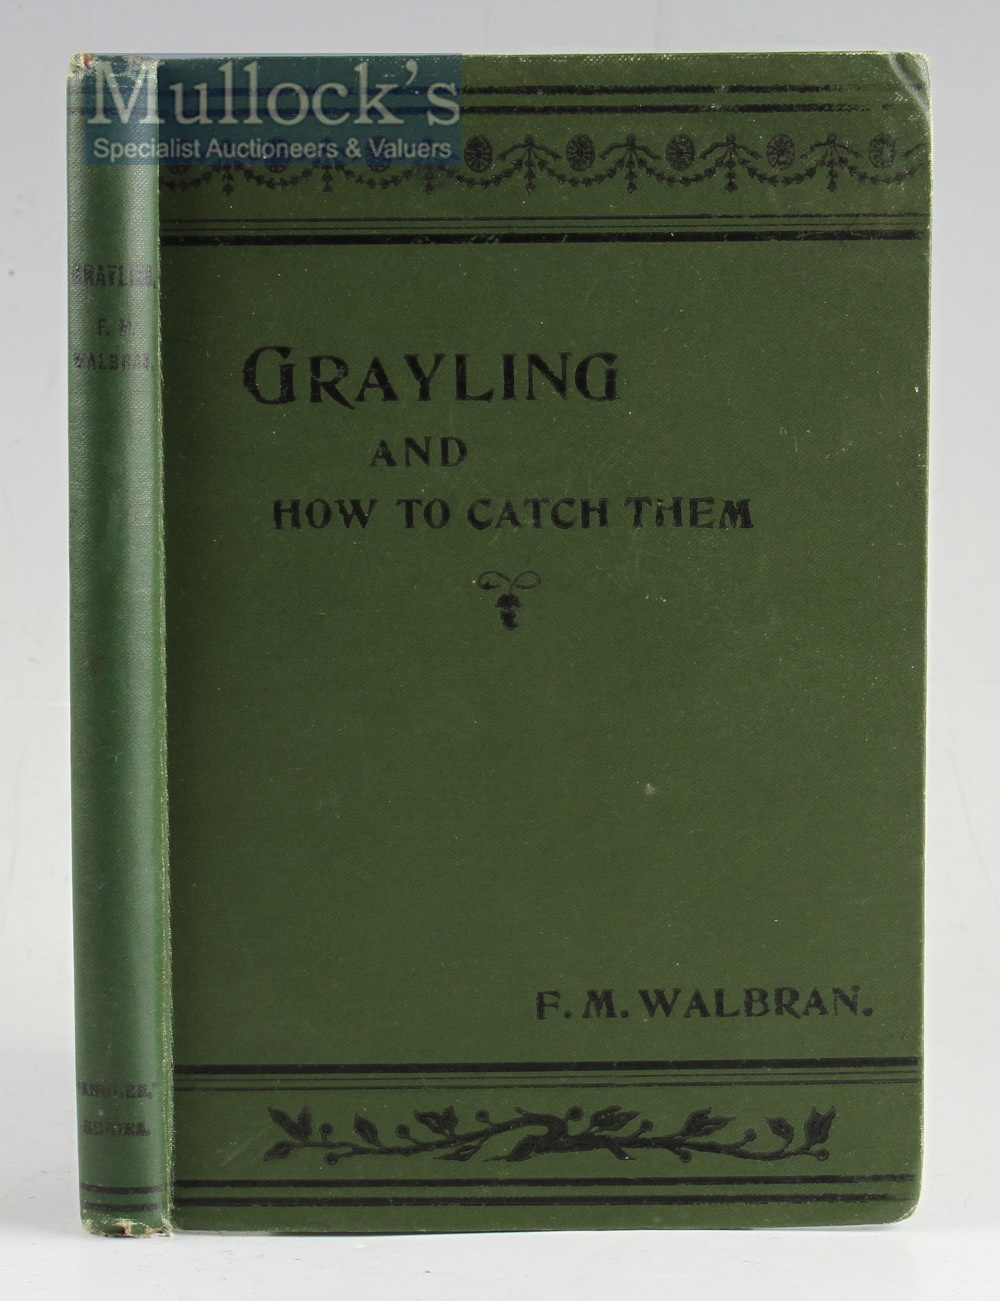 Fishing Book - Walbran, Francis, M. – “Grayling and How to Catch Them and Recollections of a